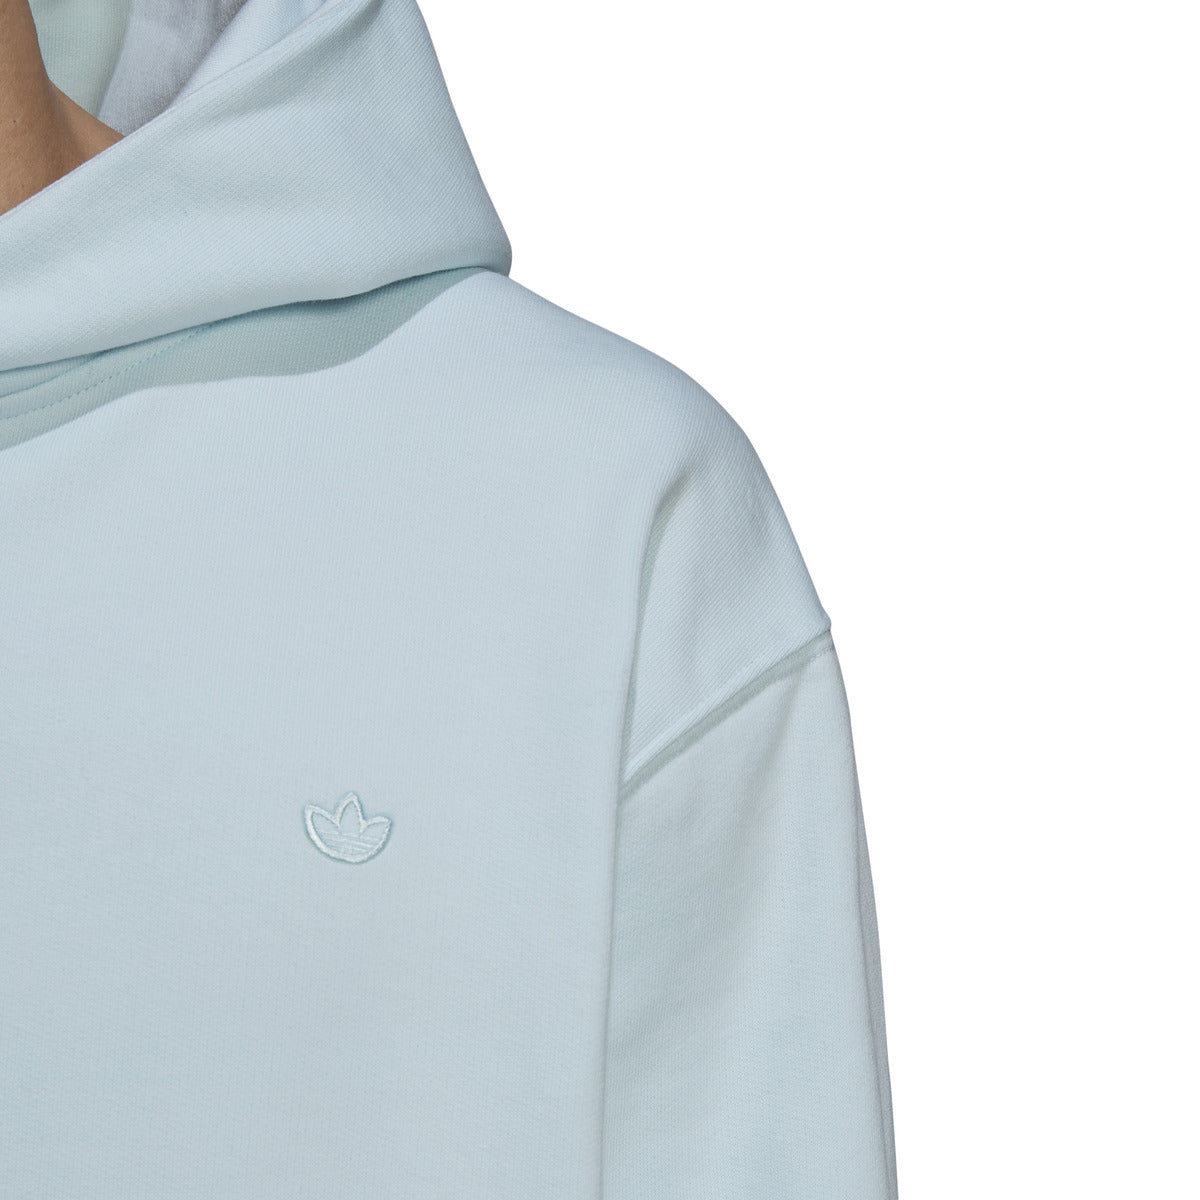 CONTEMPO HOODIE FT